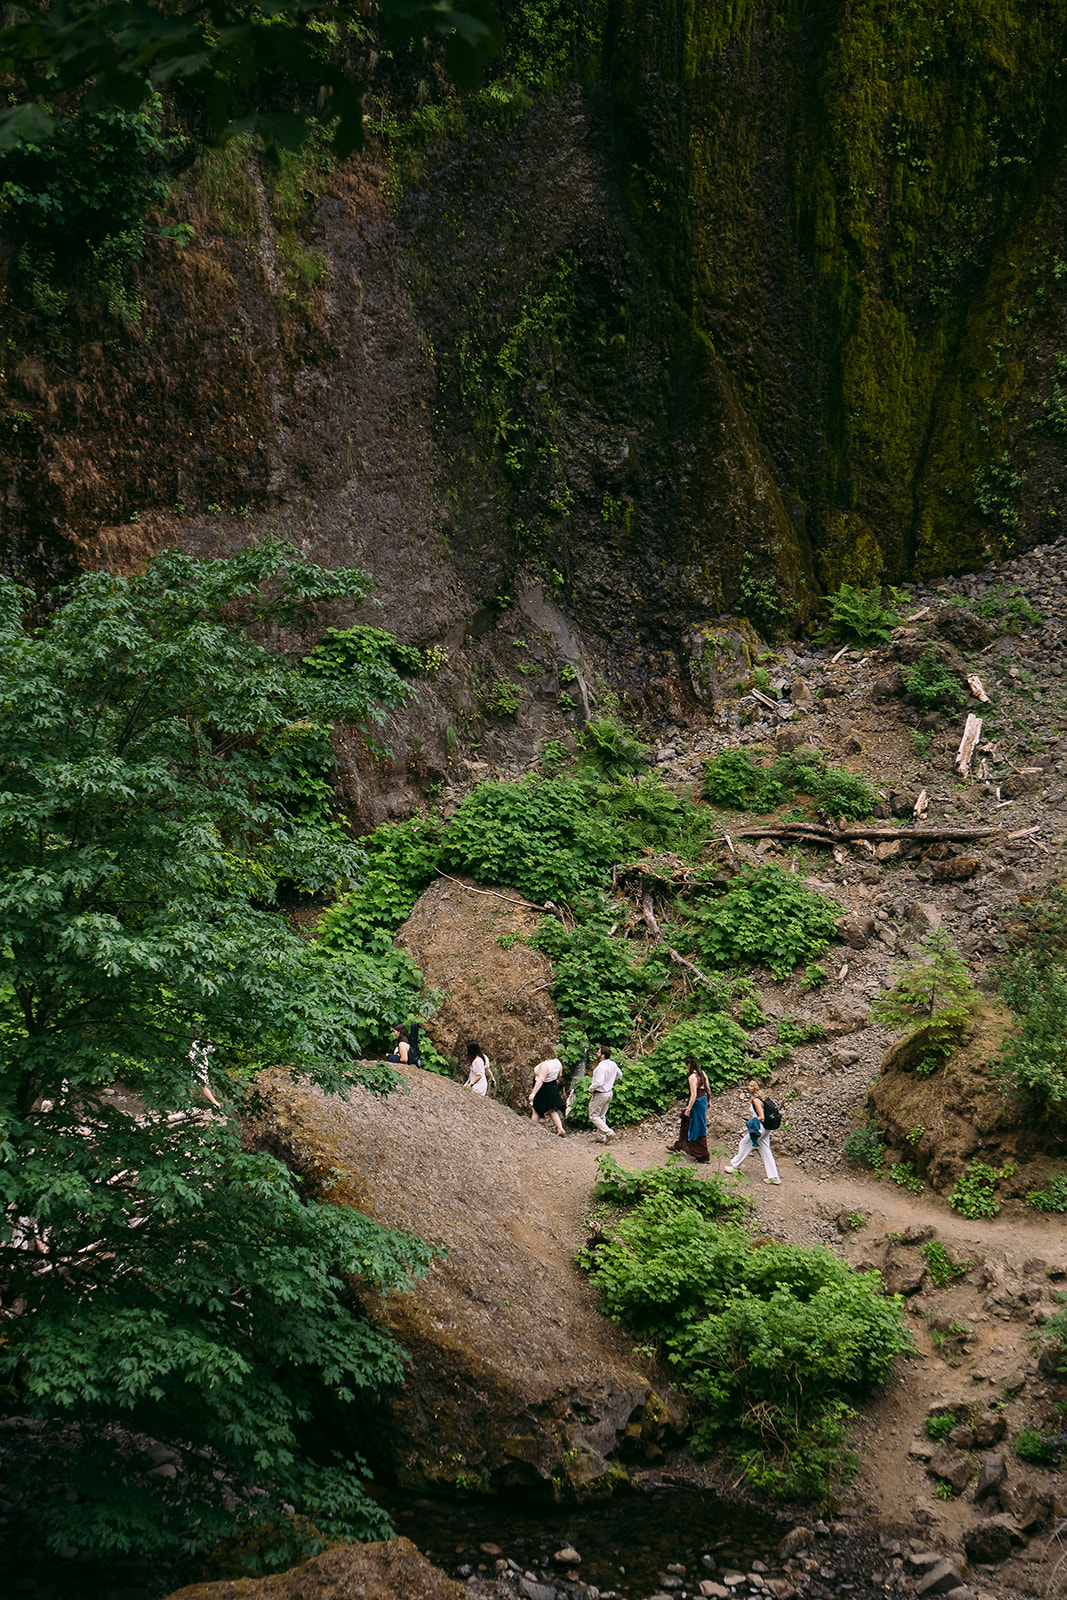 Birdseye view of wedding guests and two brides hiking along the trail at the bottom of a dark rock wall, on the way to the elopement location.